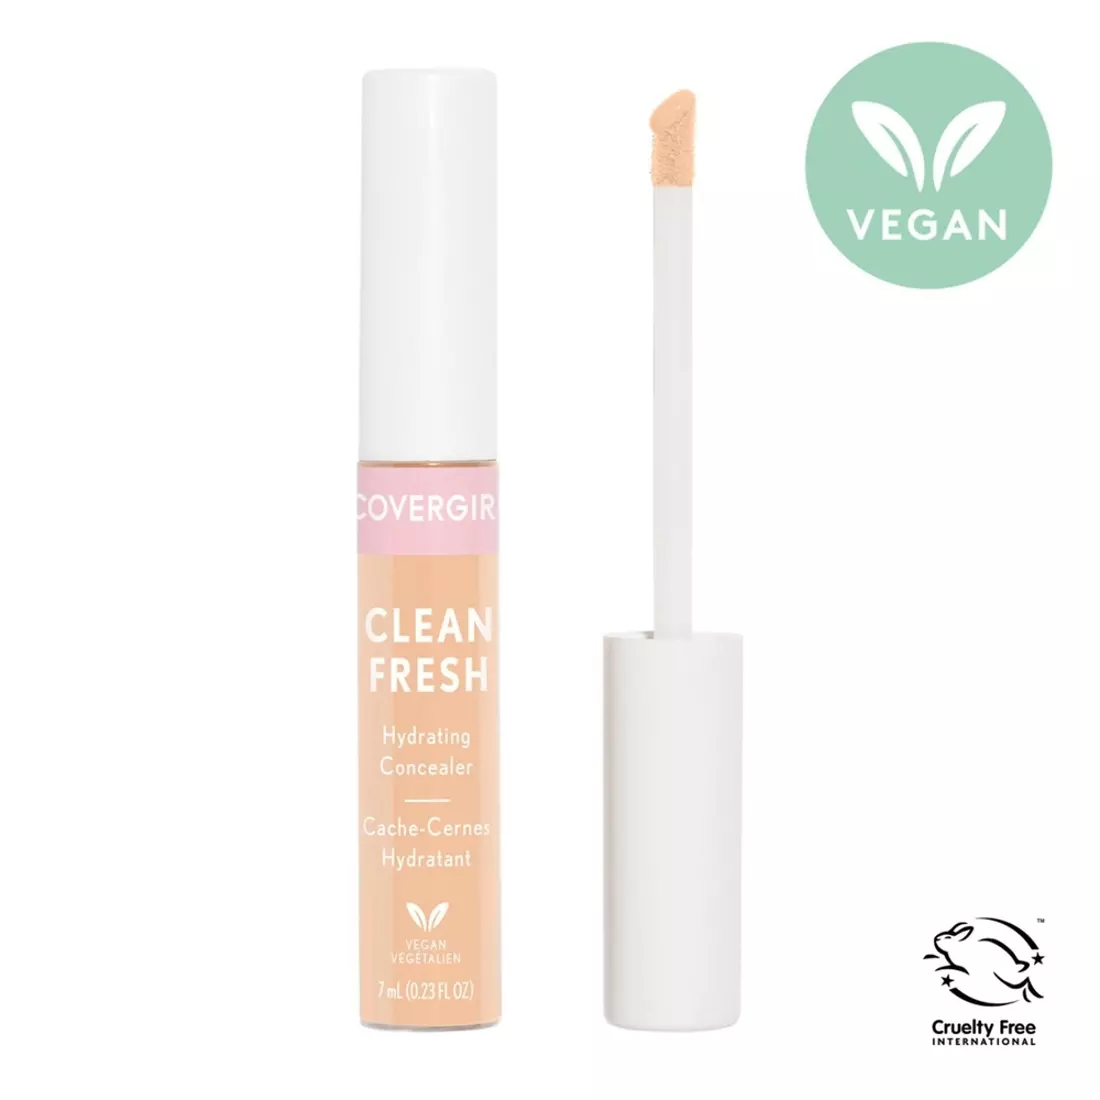 Covergirl Clean Fresh Hydrating Concealer